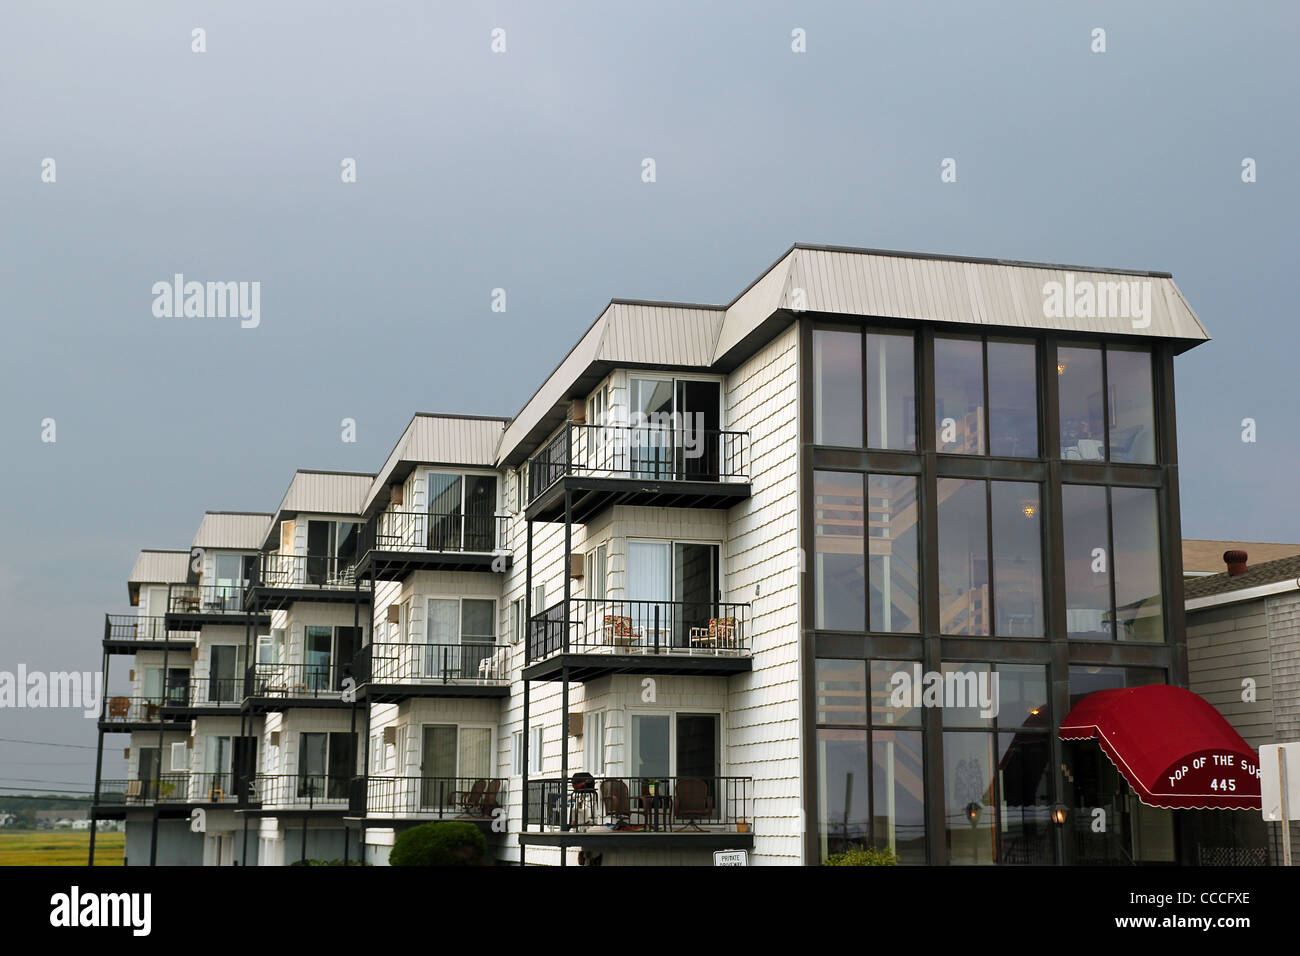 Balconies in a lodging in the seaside vacation community of Hampton Beach, New Hampshire, United States Stock Photo